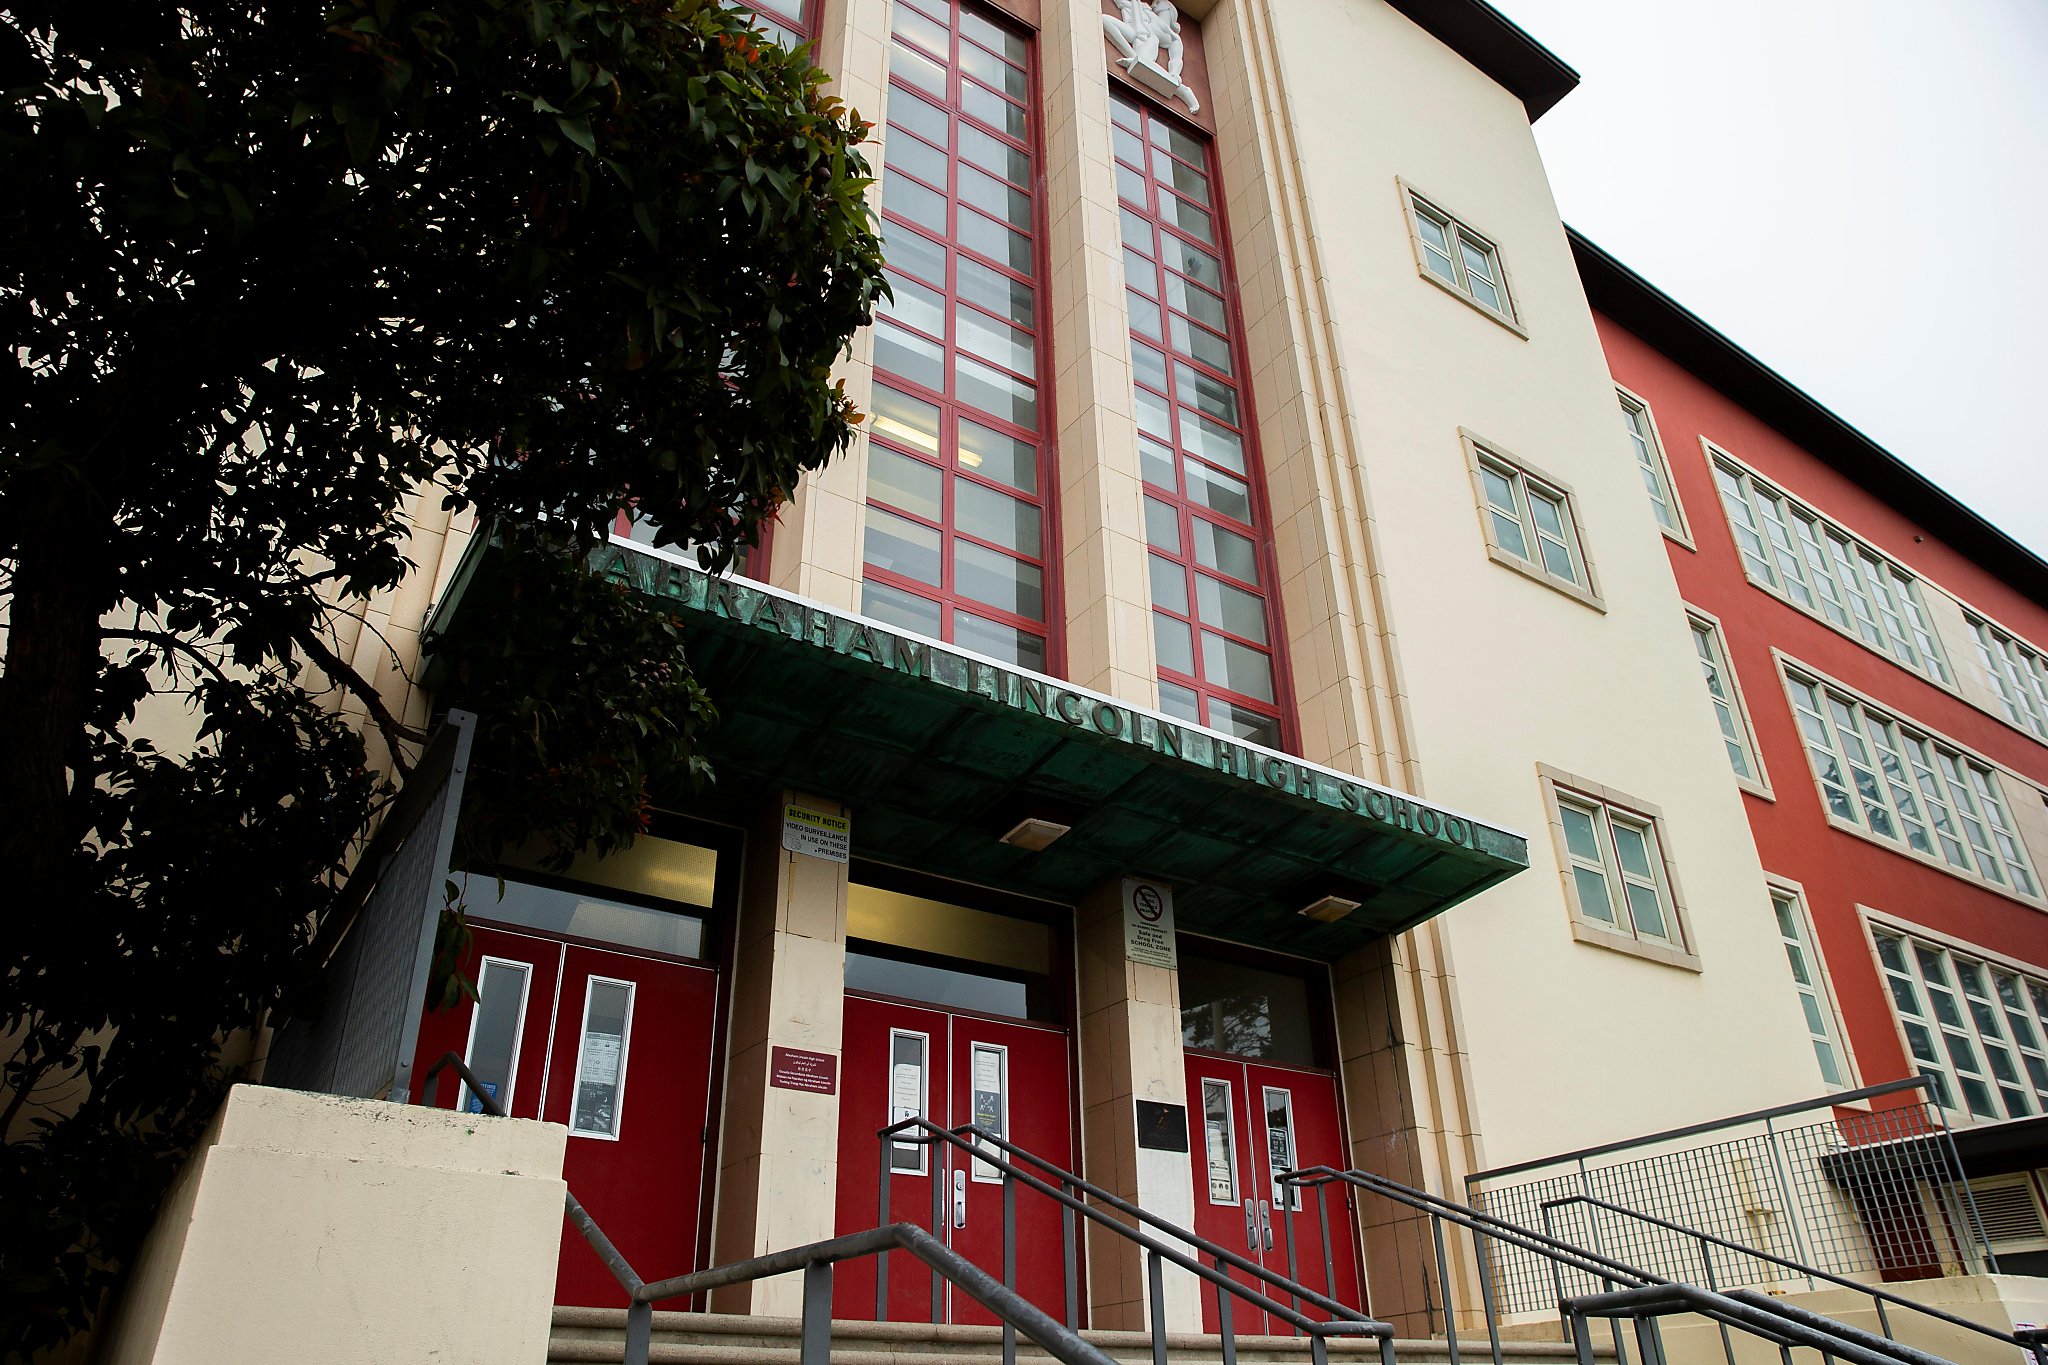 SF School Council Stops Renaming Process for 44 Schools After Suffering Attacks